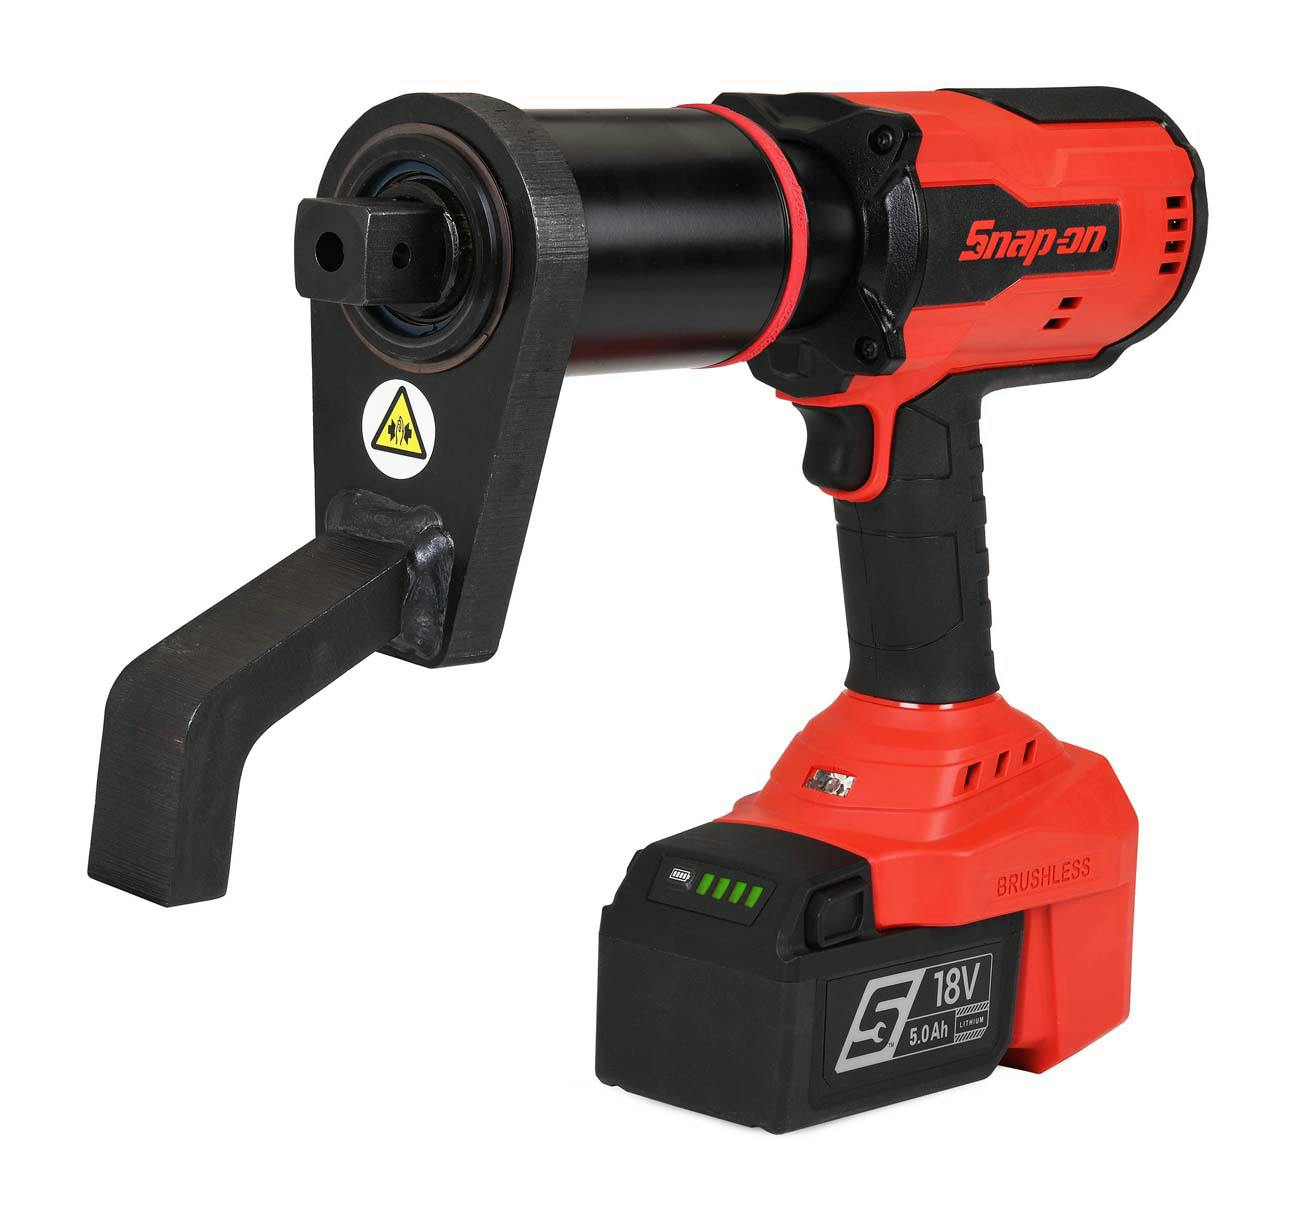 New Snap-on mini drills aim for precision